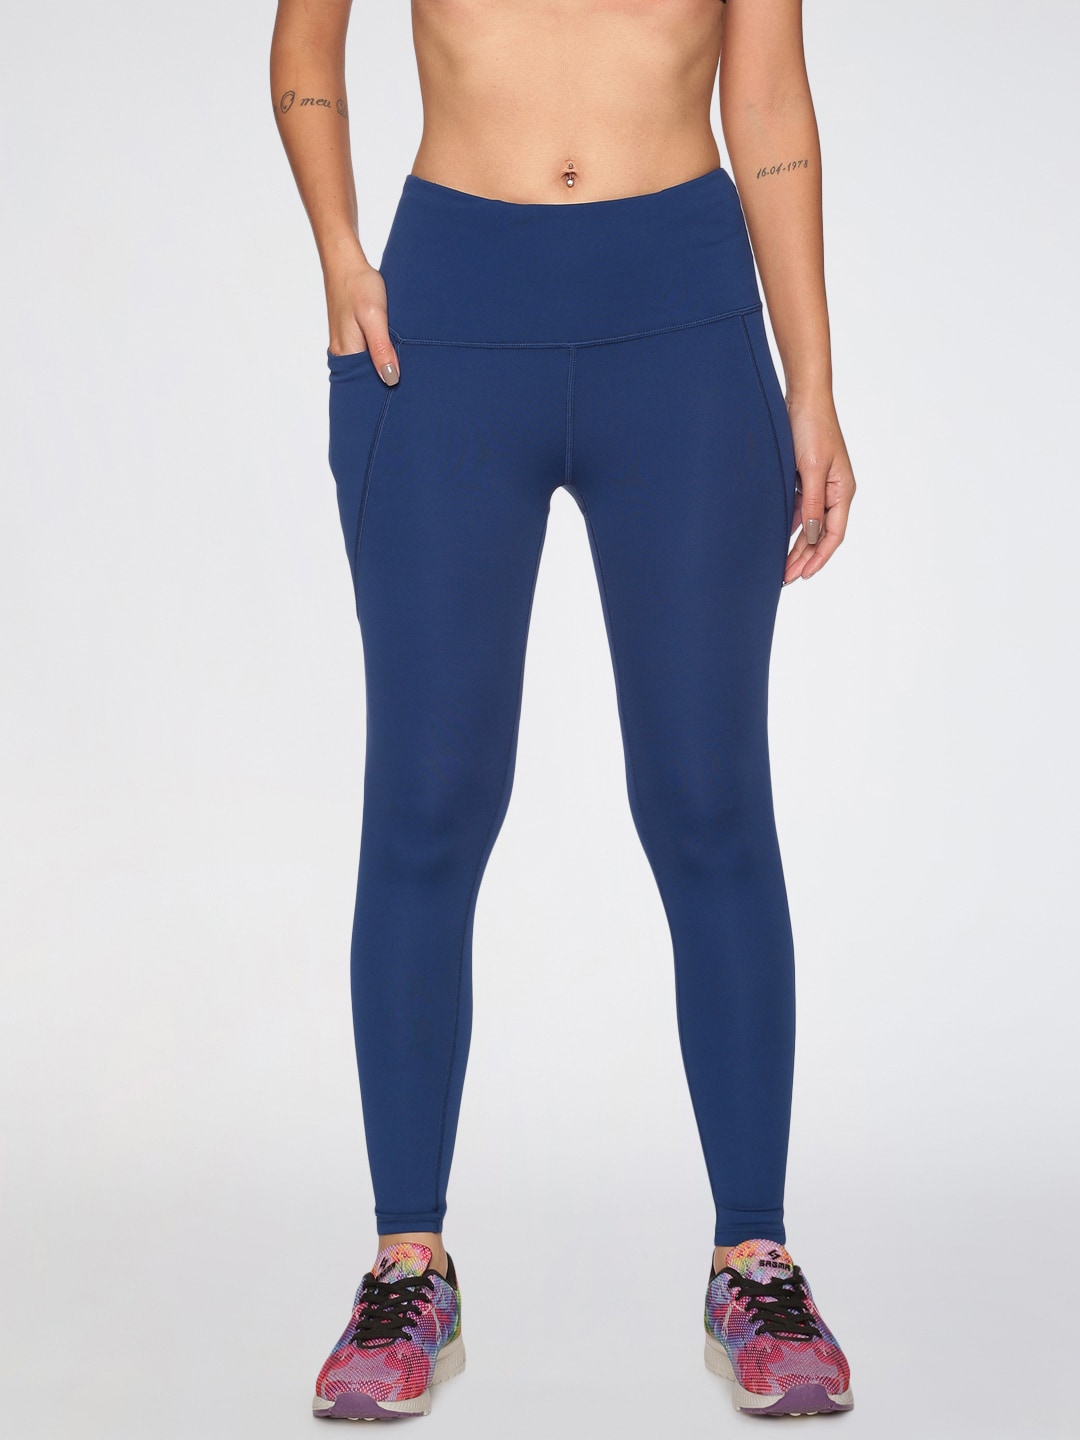 BlissClub Women Navy Blue Super Stretchy & High Waisted The Ultimate Leggings Price in India